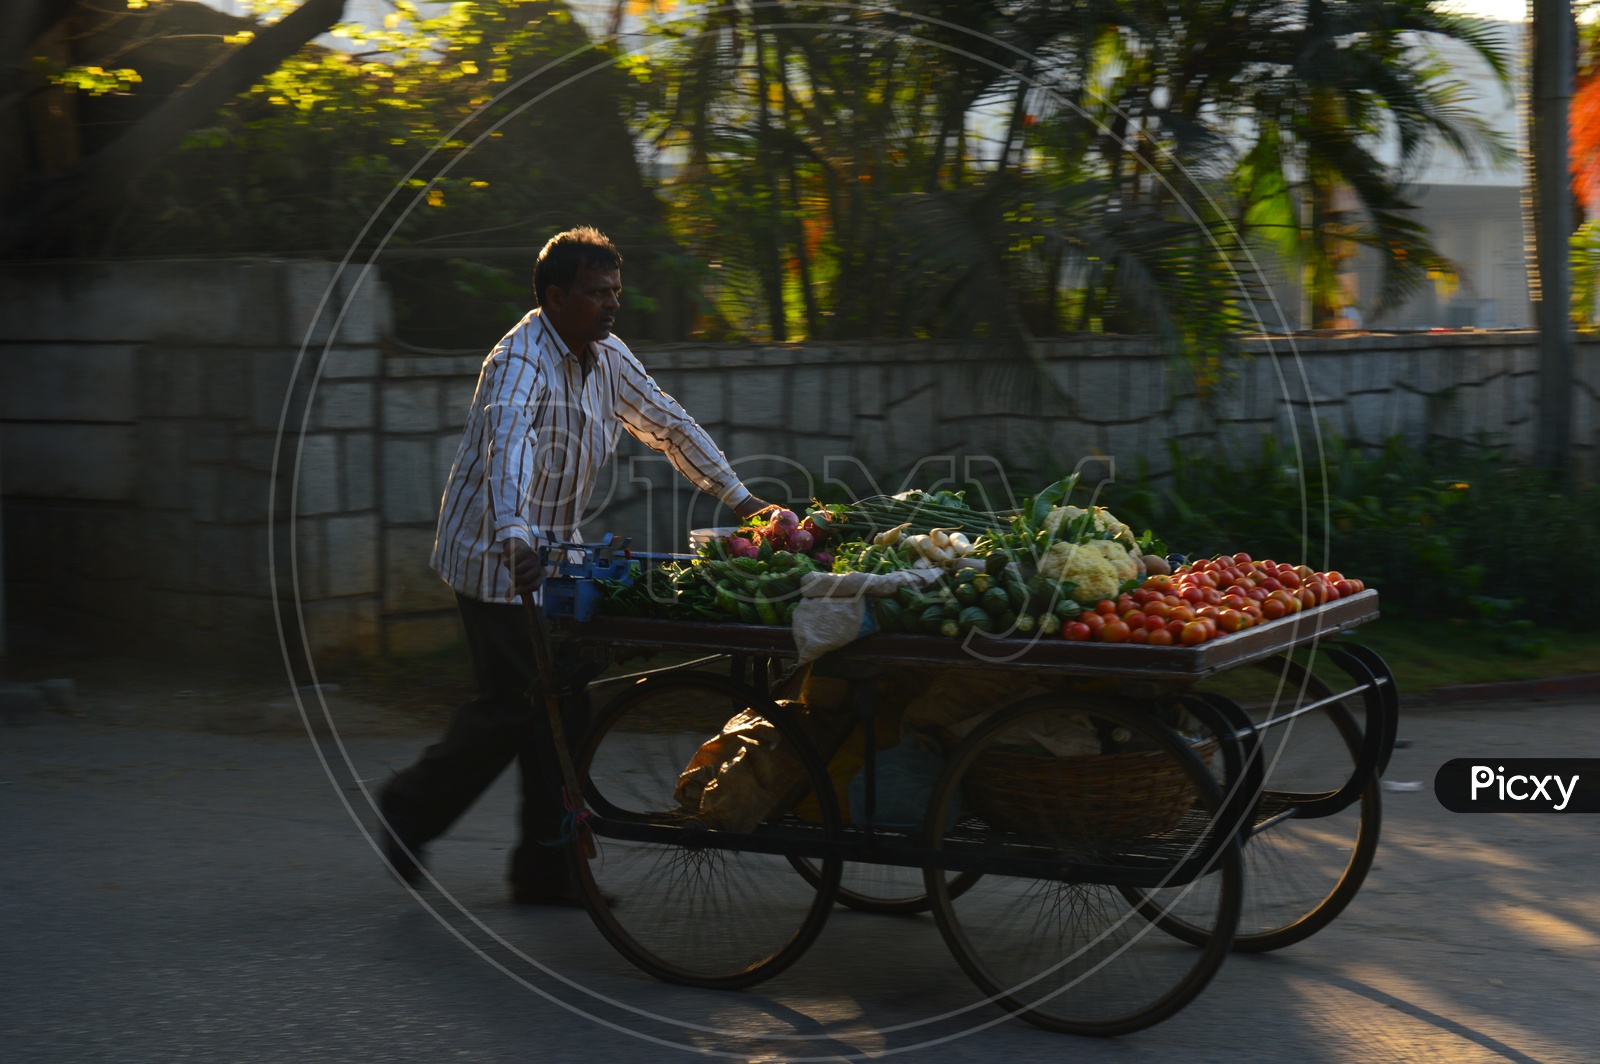 A vegetable vendor carrying his cart on a road